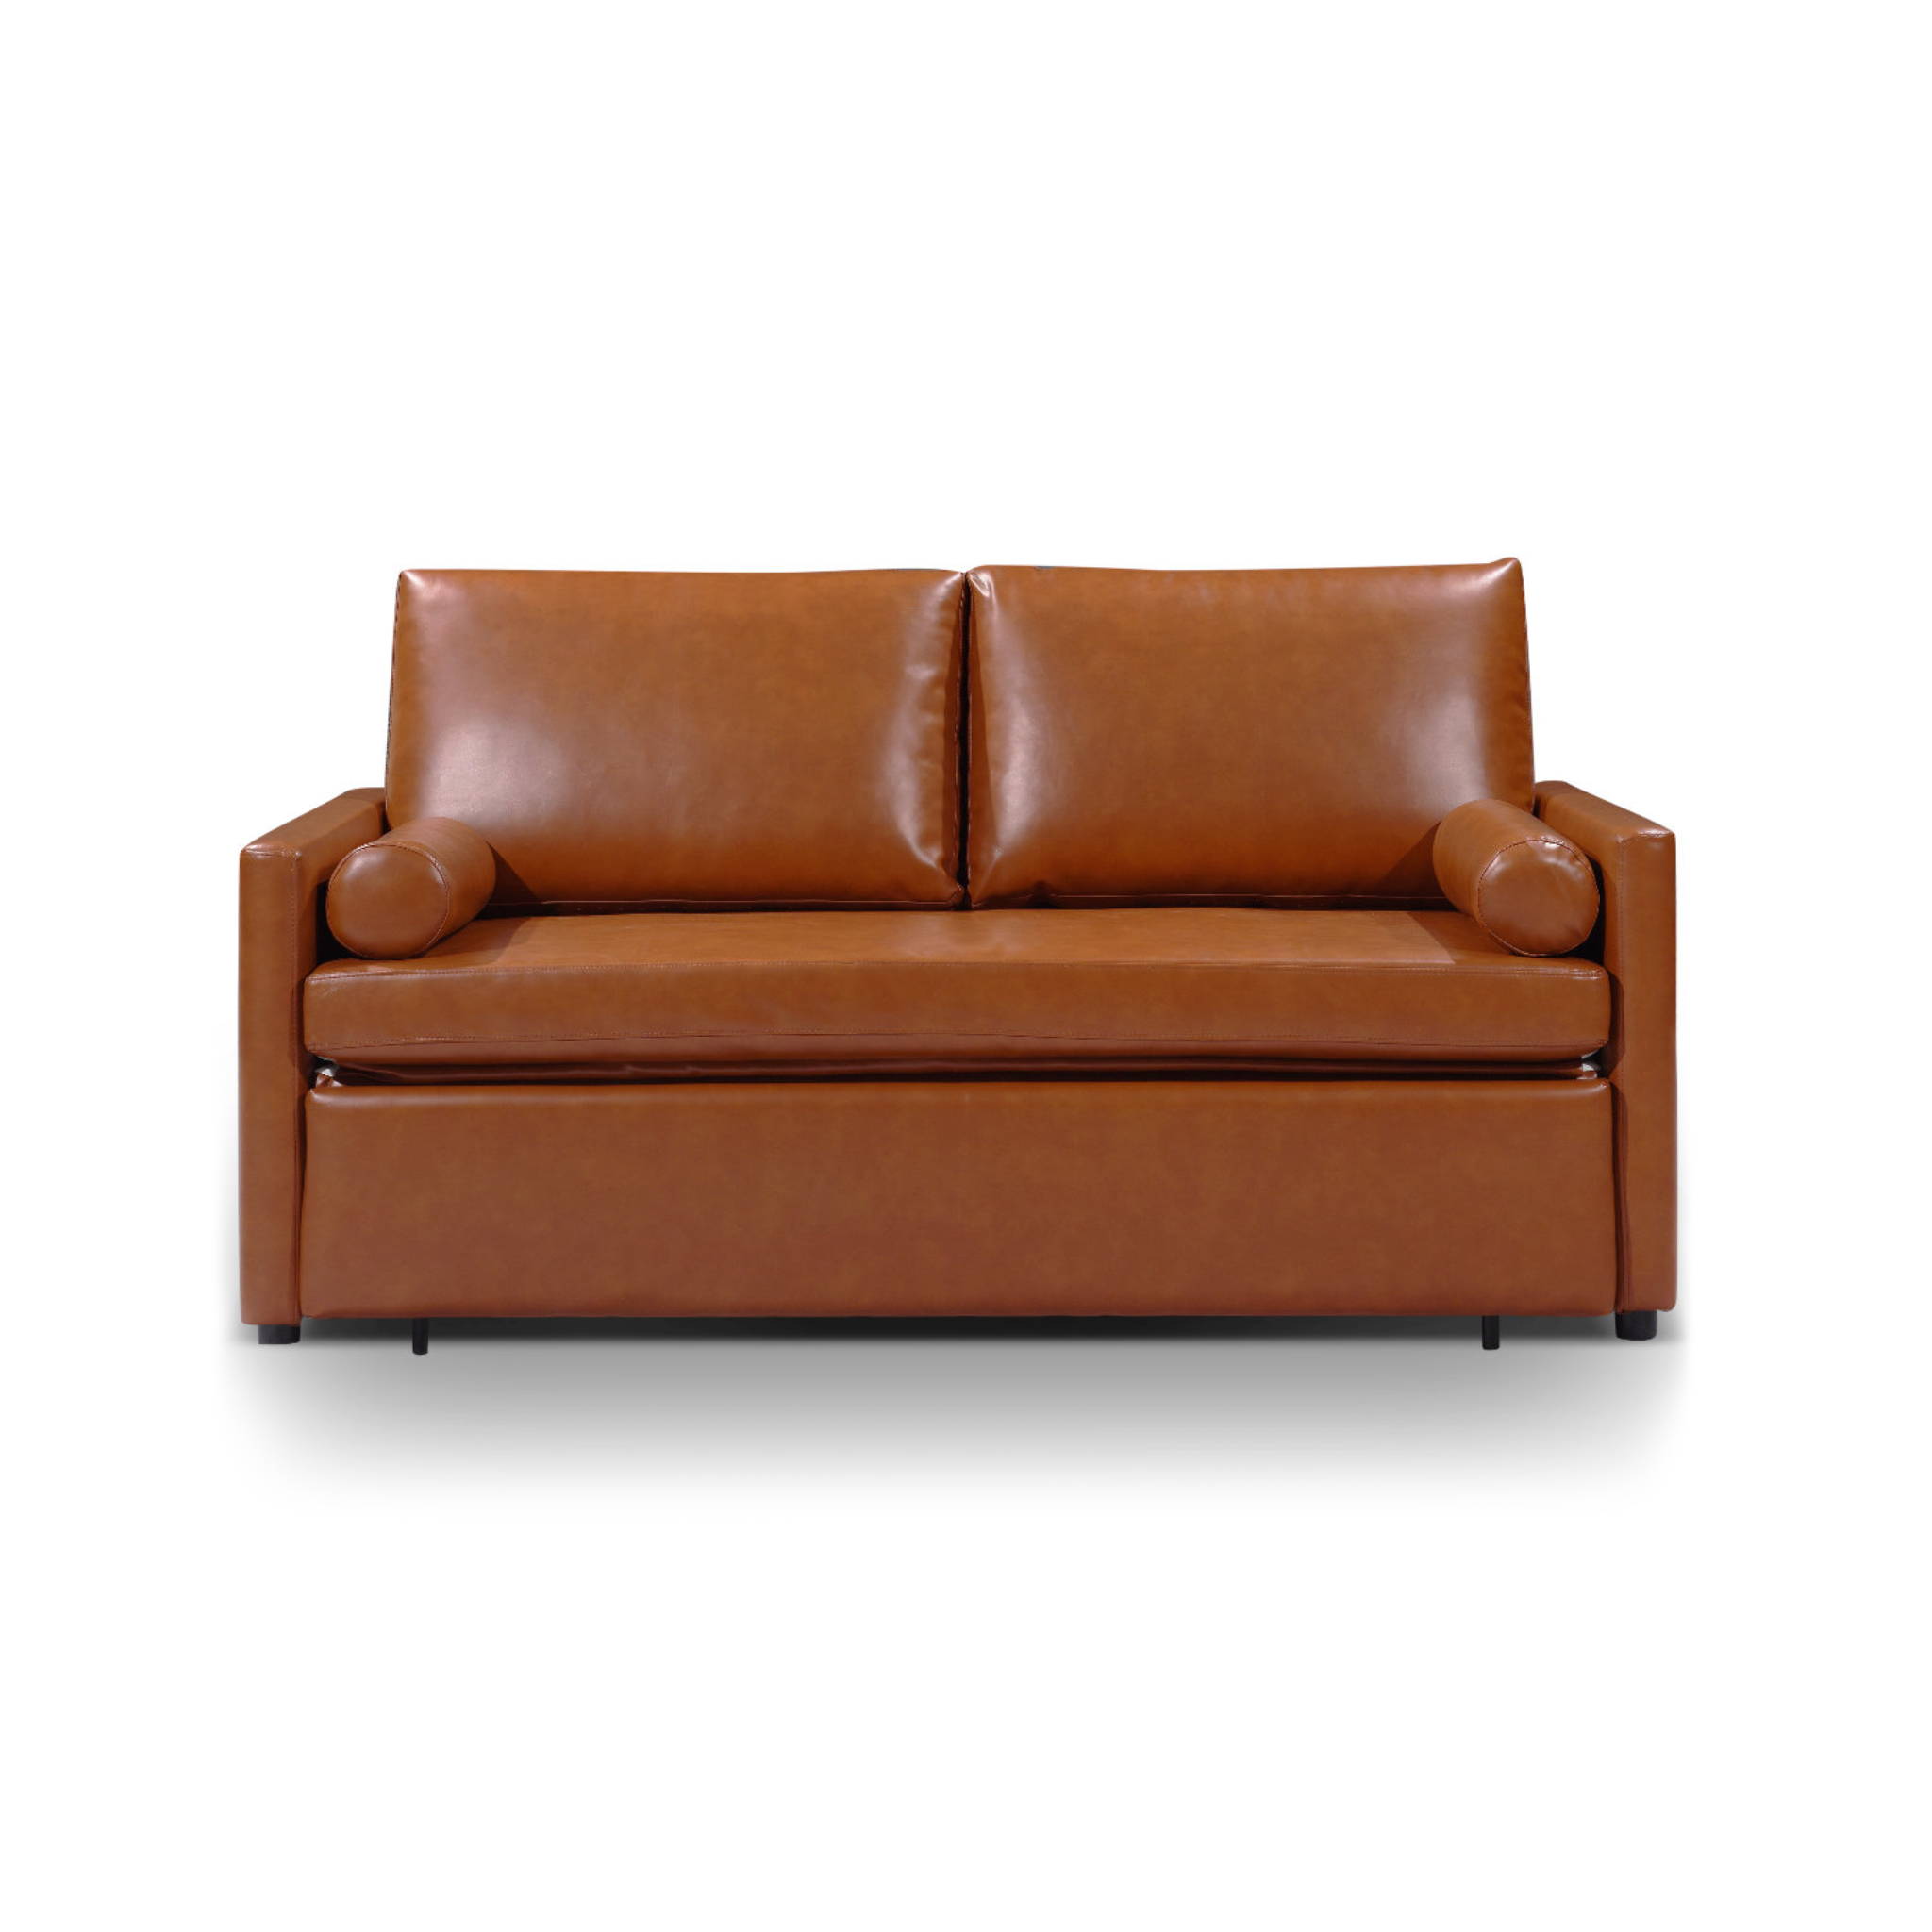 Løve bakke Udrydde Harmony Sofa Bed Queen - Eco Leather - Expand Furniture - Folding Tables,  Smarter Wall Beds, Space Savers